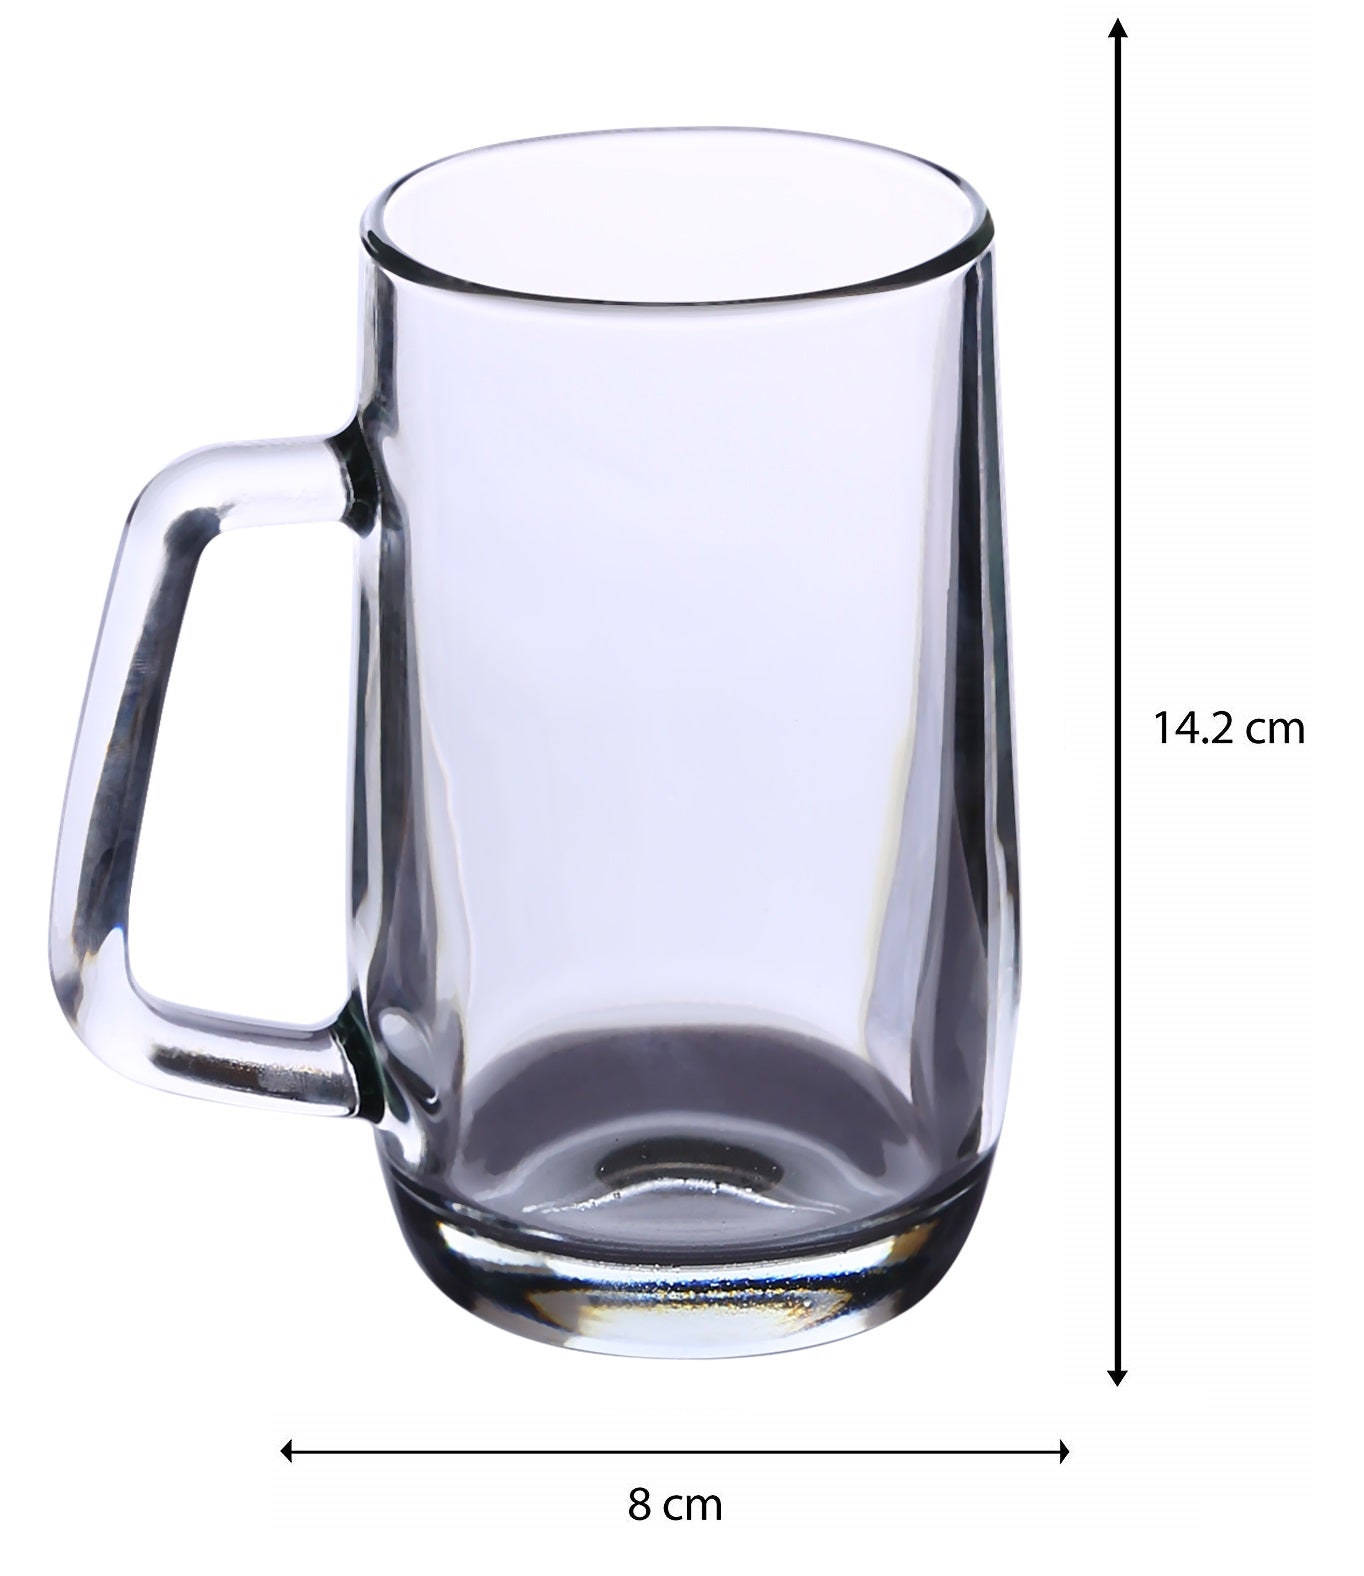 Dimensions of a Classic Glassware - Ideal for beer enthusiasts and juice lovers.